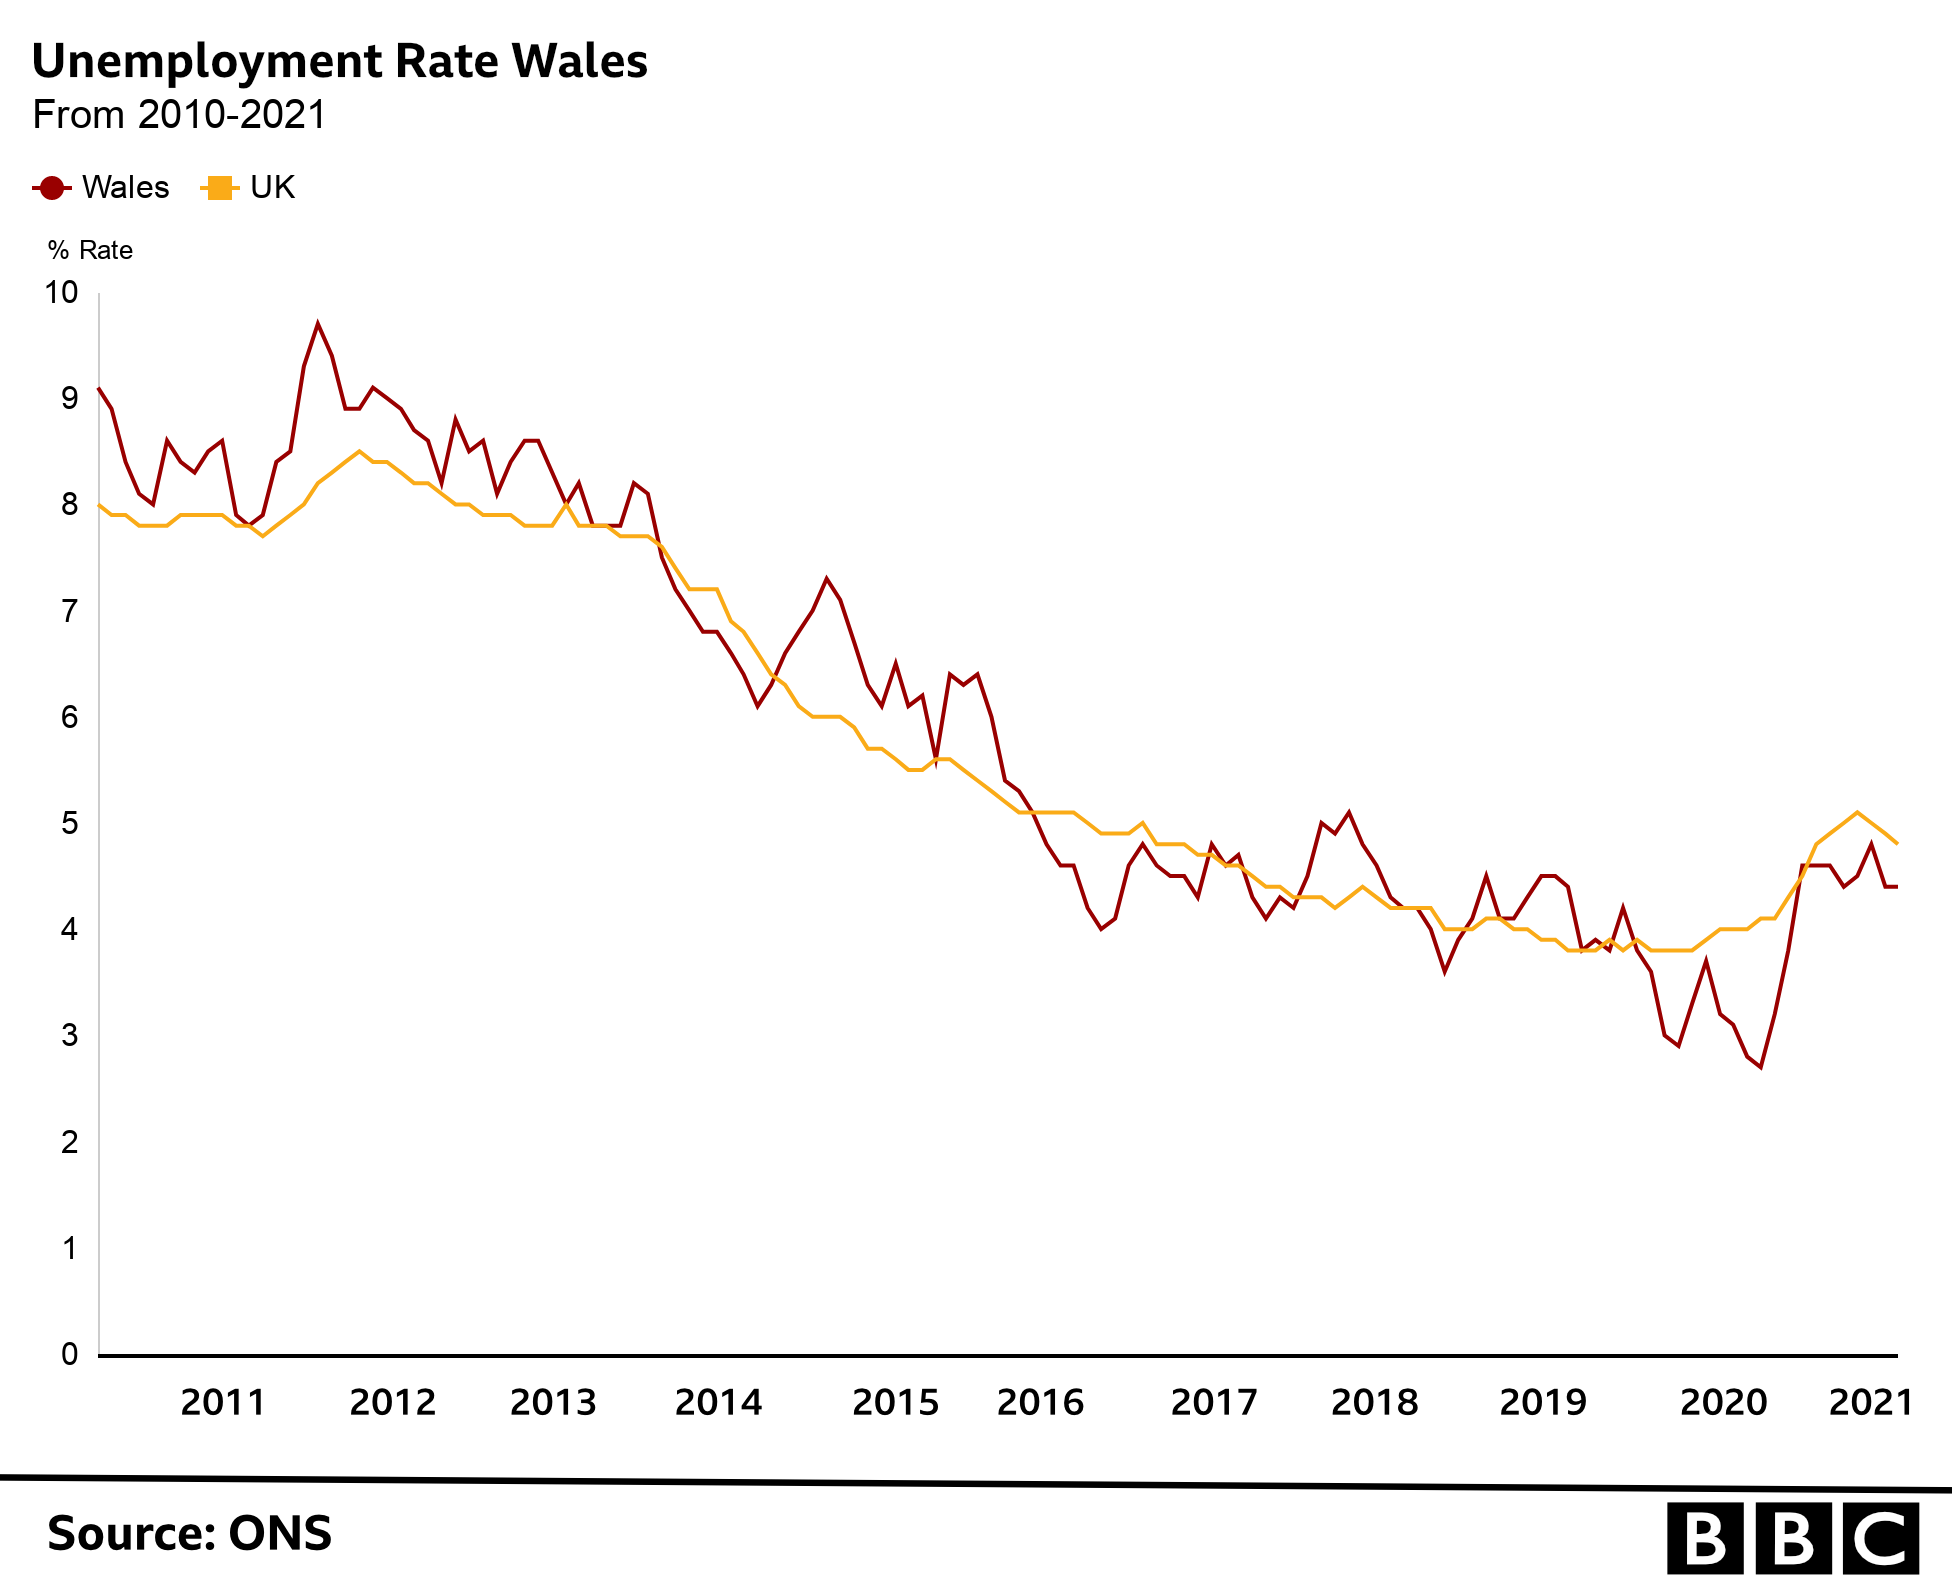 Graph of unemployment rates Wales-UK 2010-2021